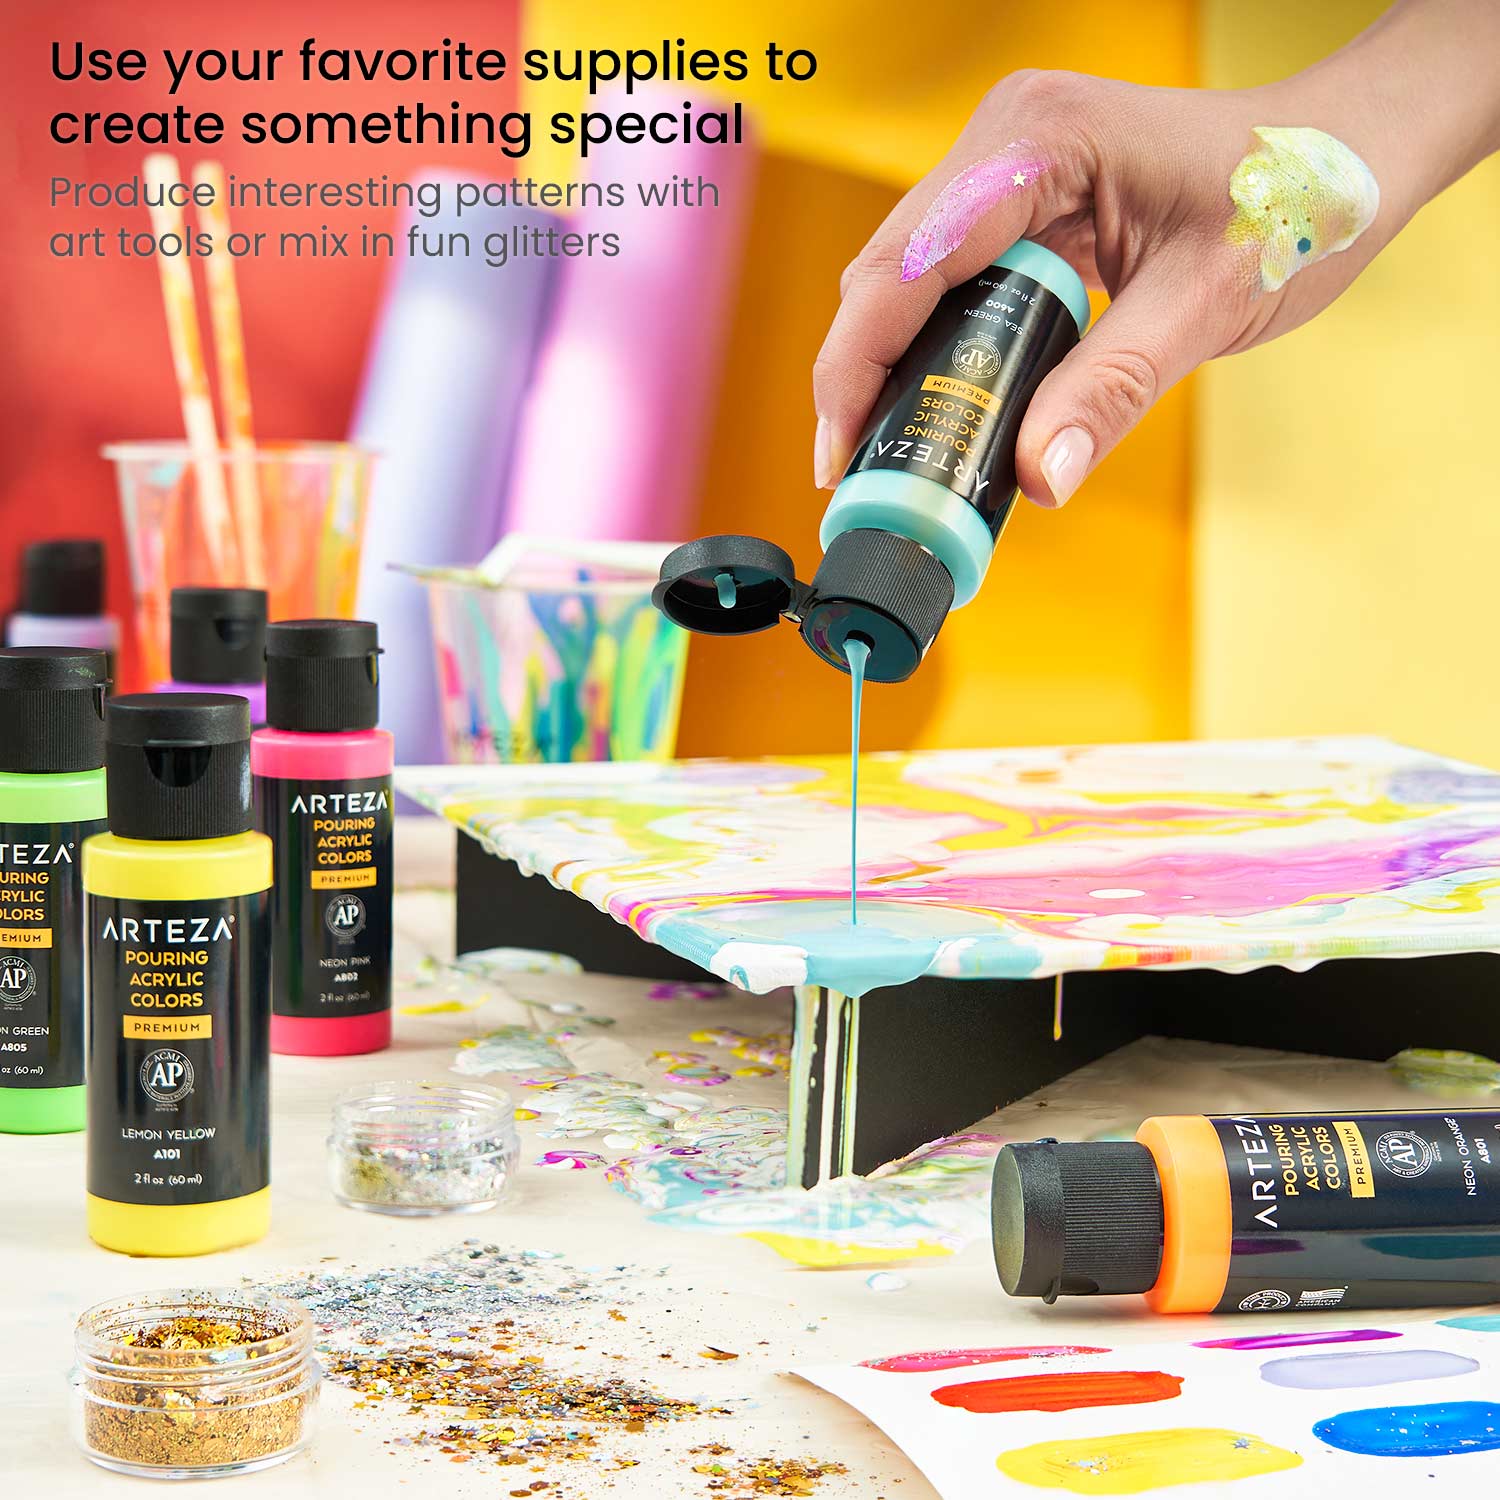 DIY Acrylic Paint Pouring Art Kit with Supplies, Canvases, Glitter and More  